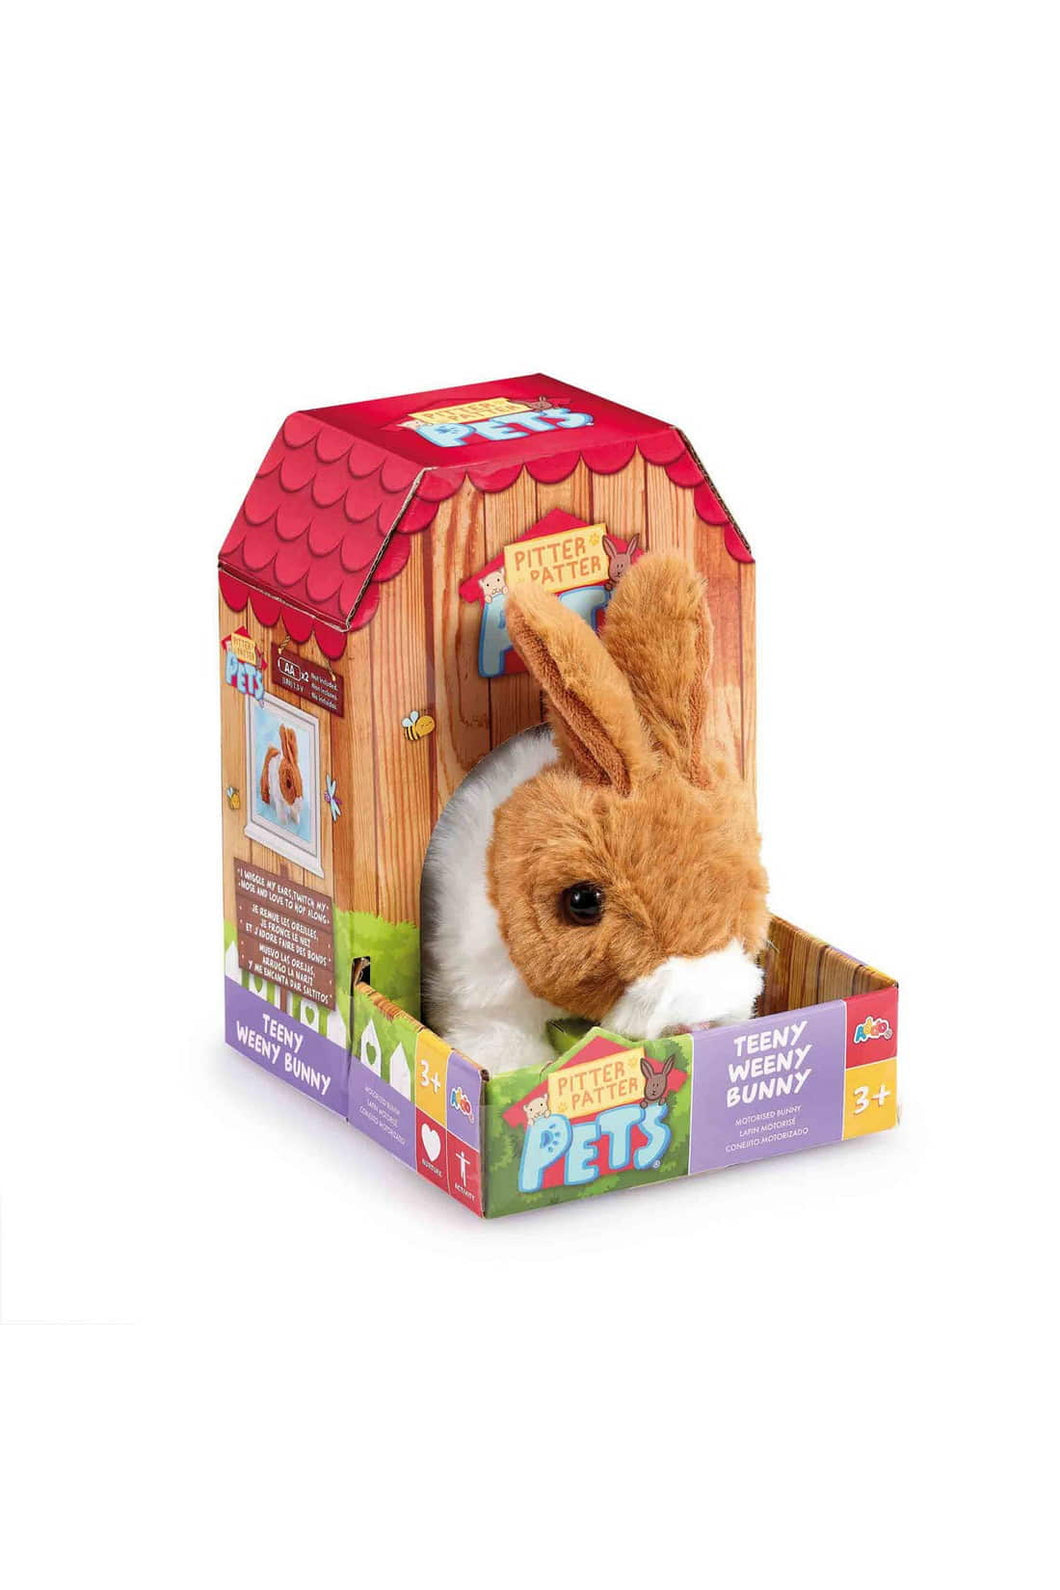 Addo Pitter Patter Pets Teeny Weeny Bunny - Brown Electronic Pet